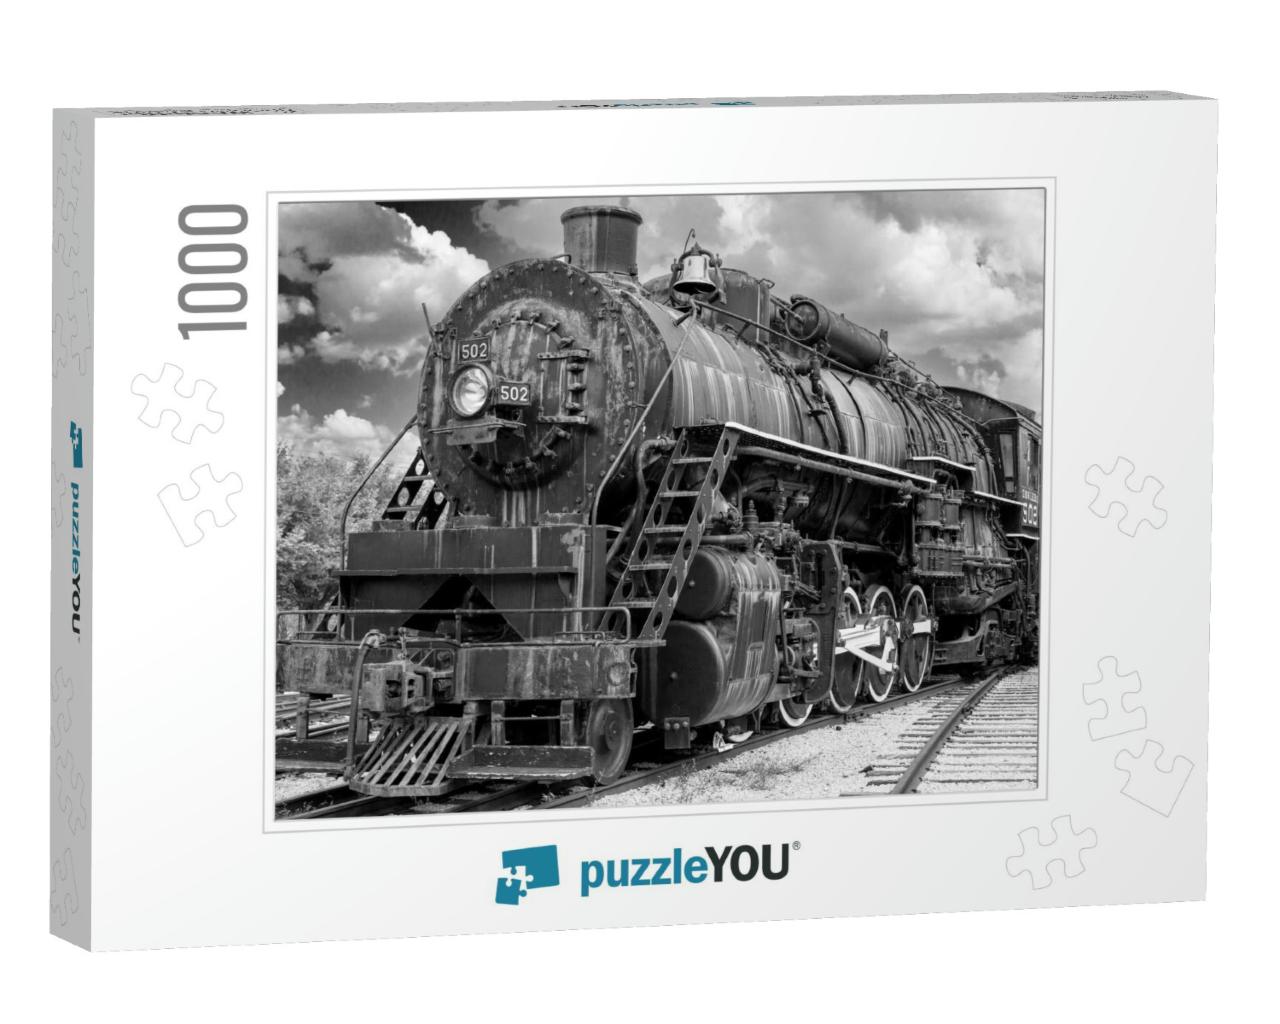 Black & White Photo of an Old Steam Engine Train... Jigsaw Puzzle with 1000 pieces